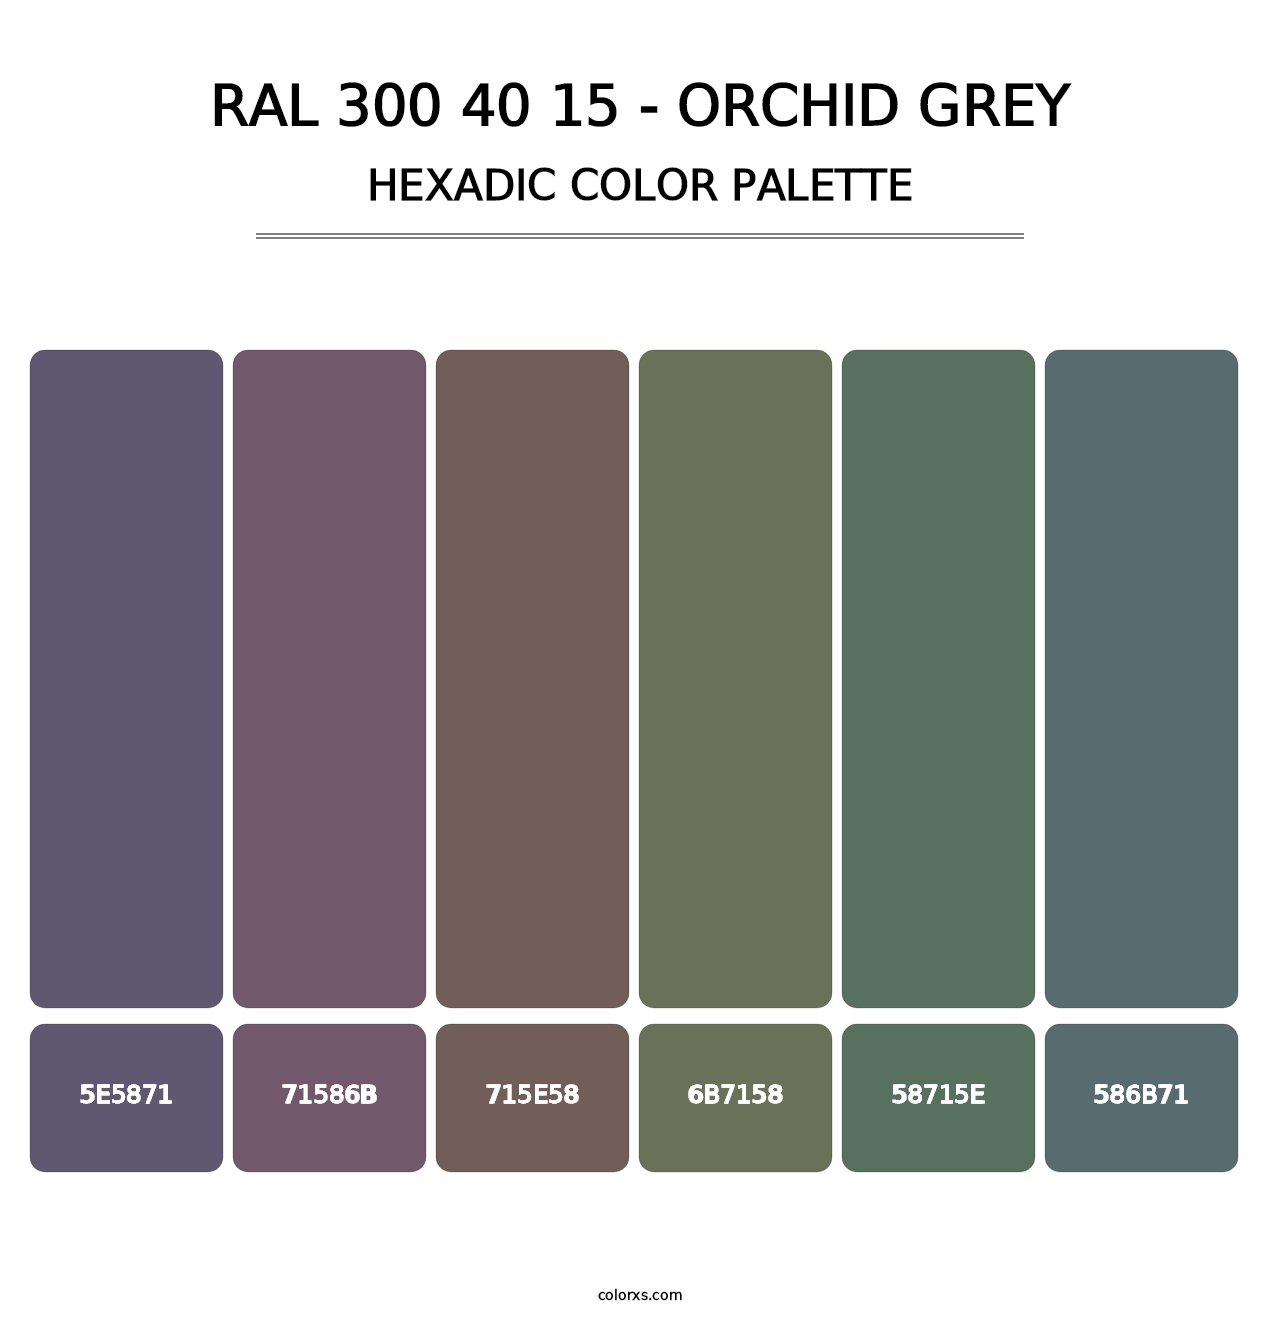 RAL 300 40 15 - Orchid Grey - Hexadic Color Palette